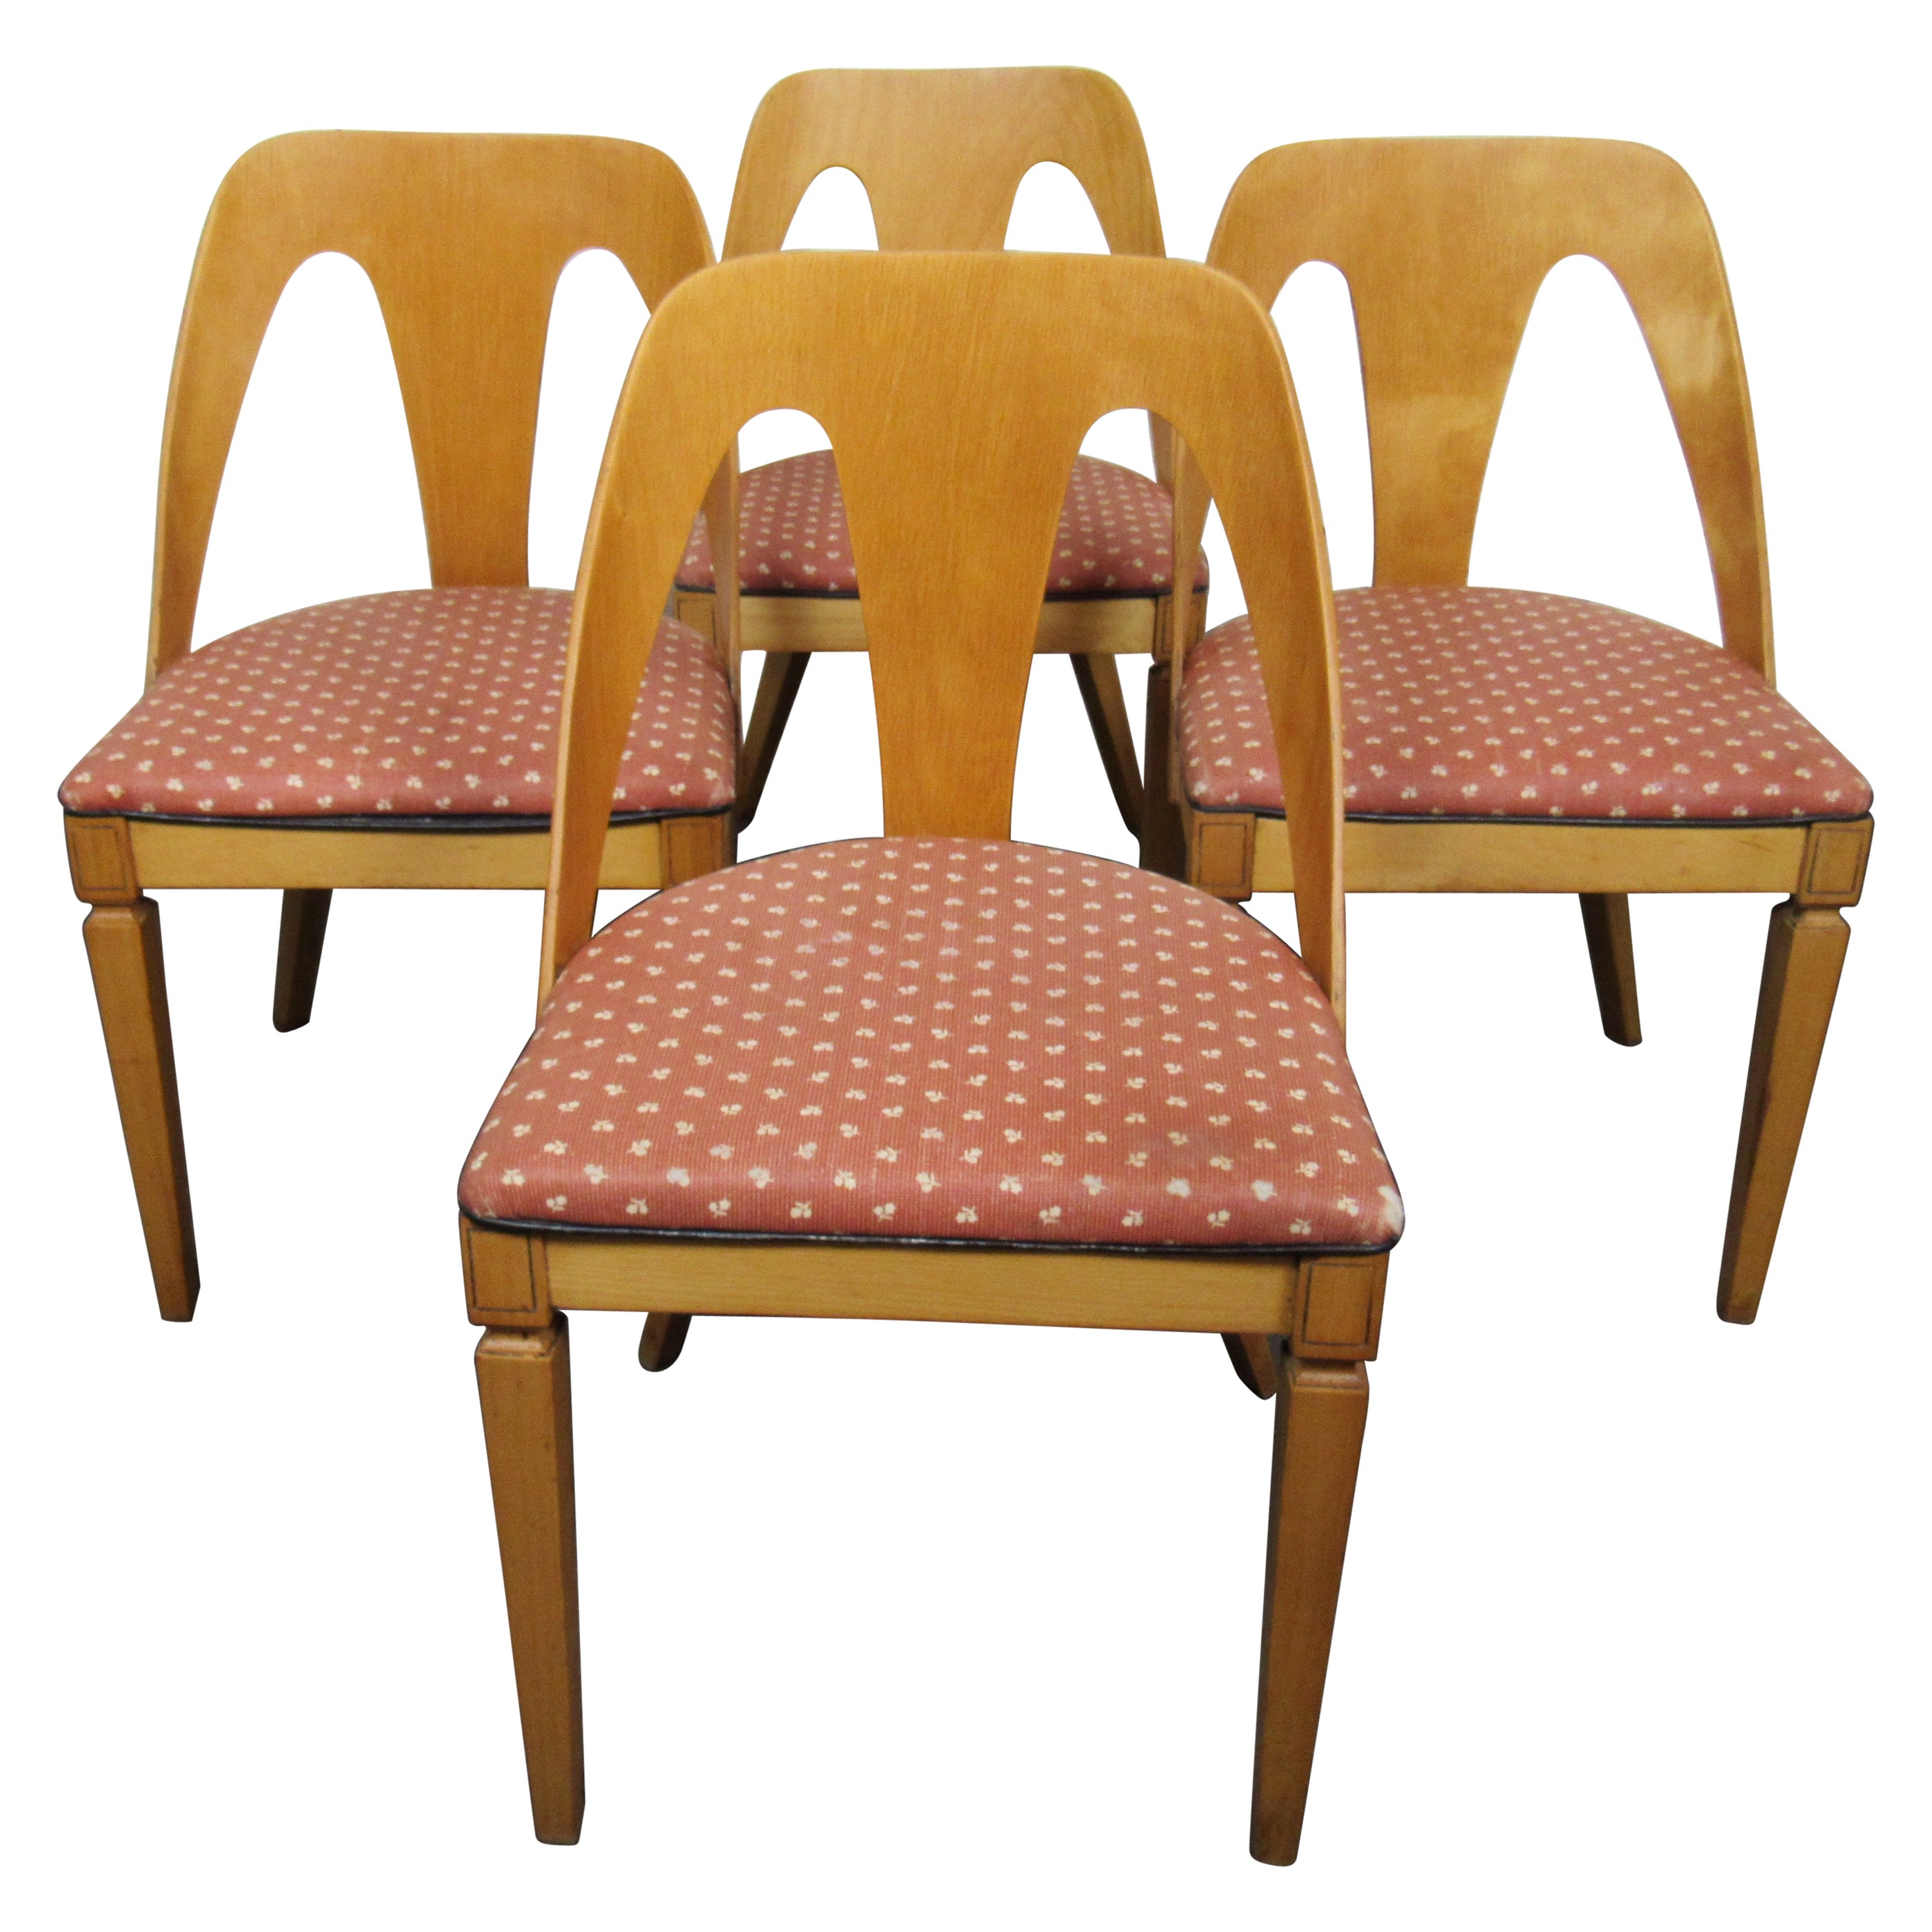 Set of Four Vintage Dining Room Chairs